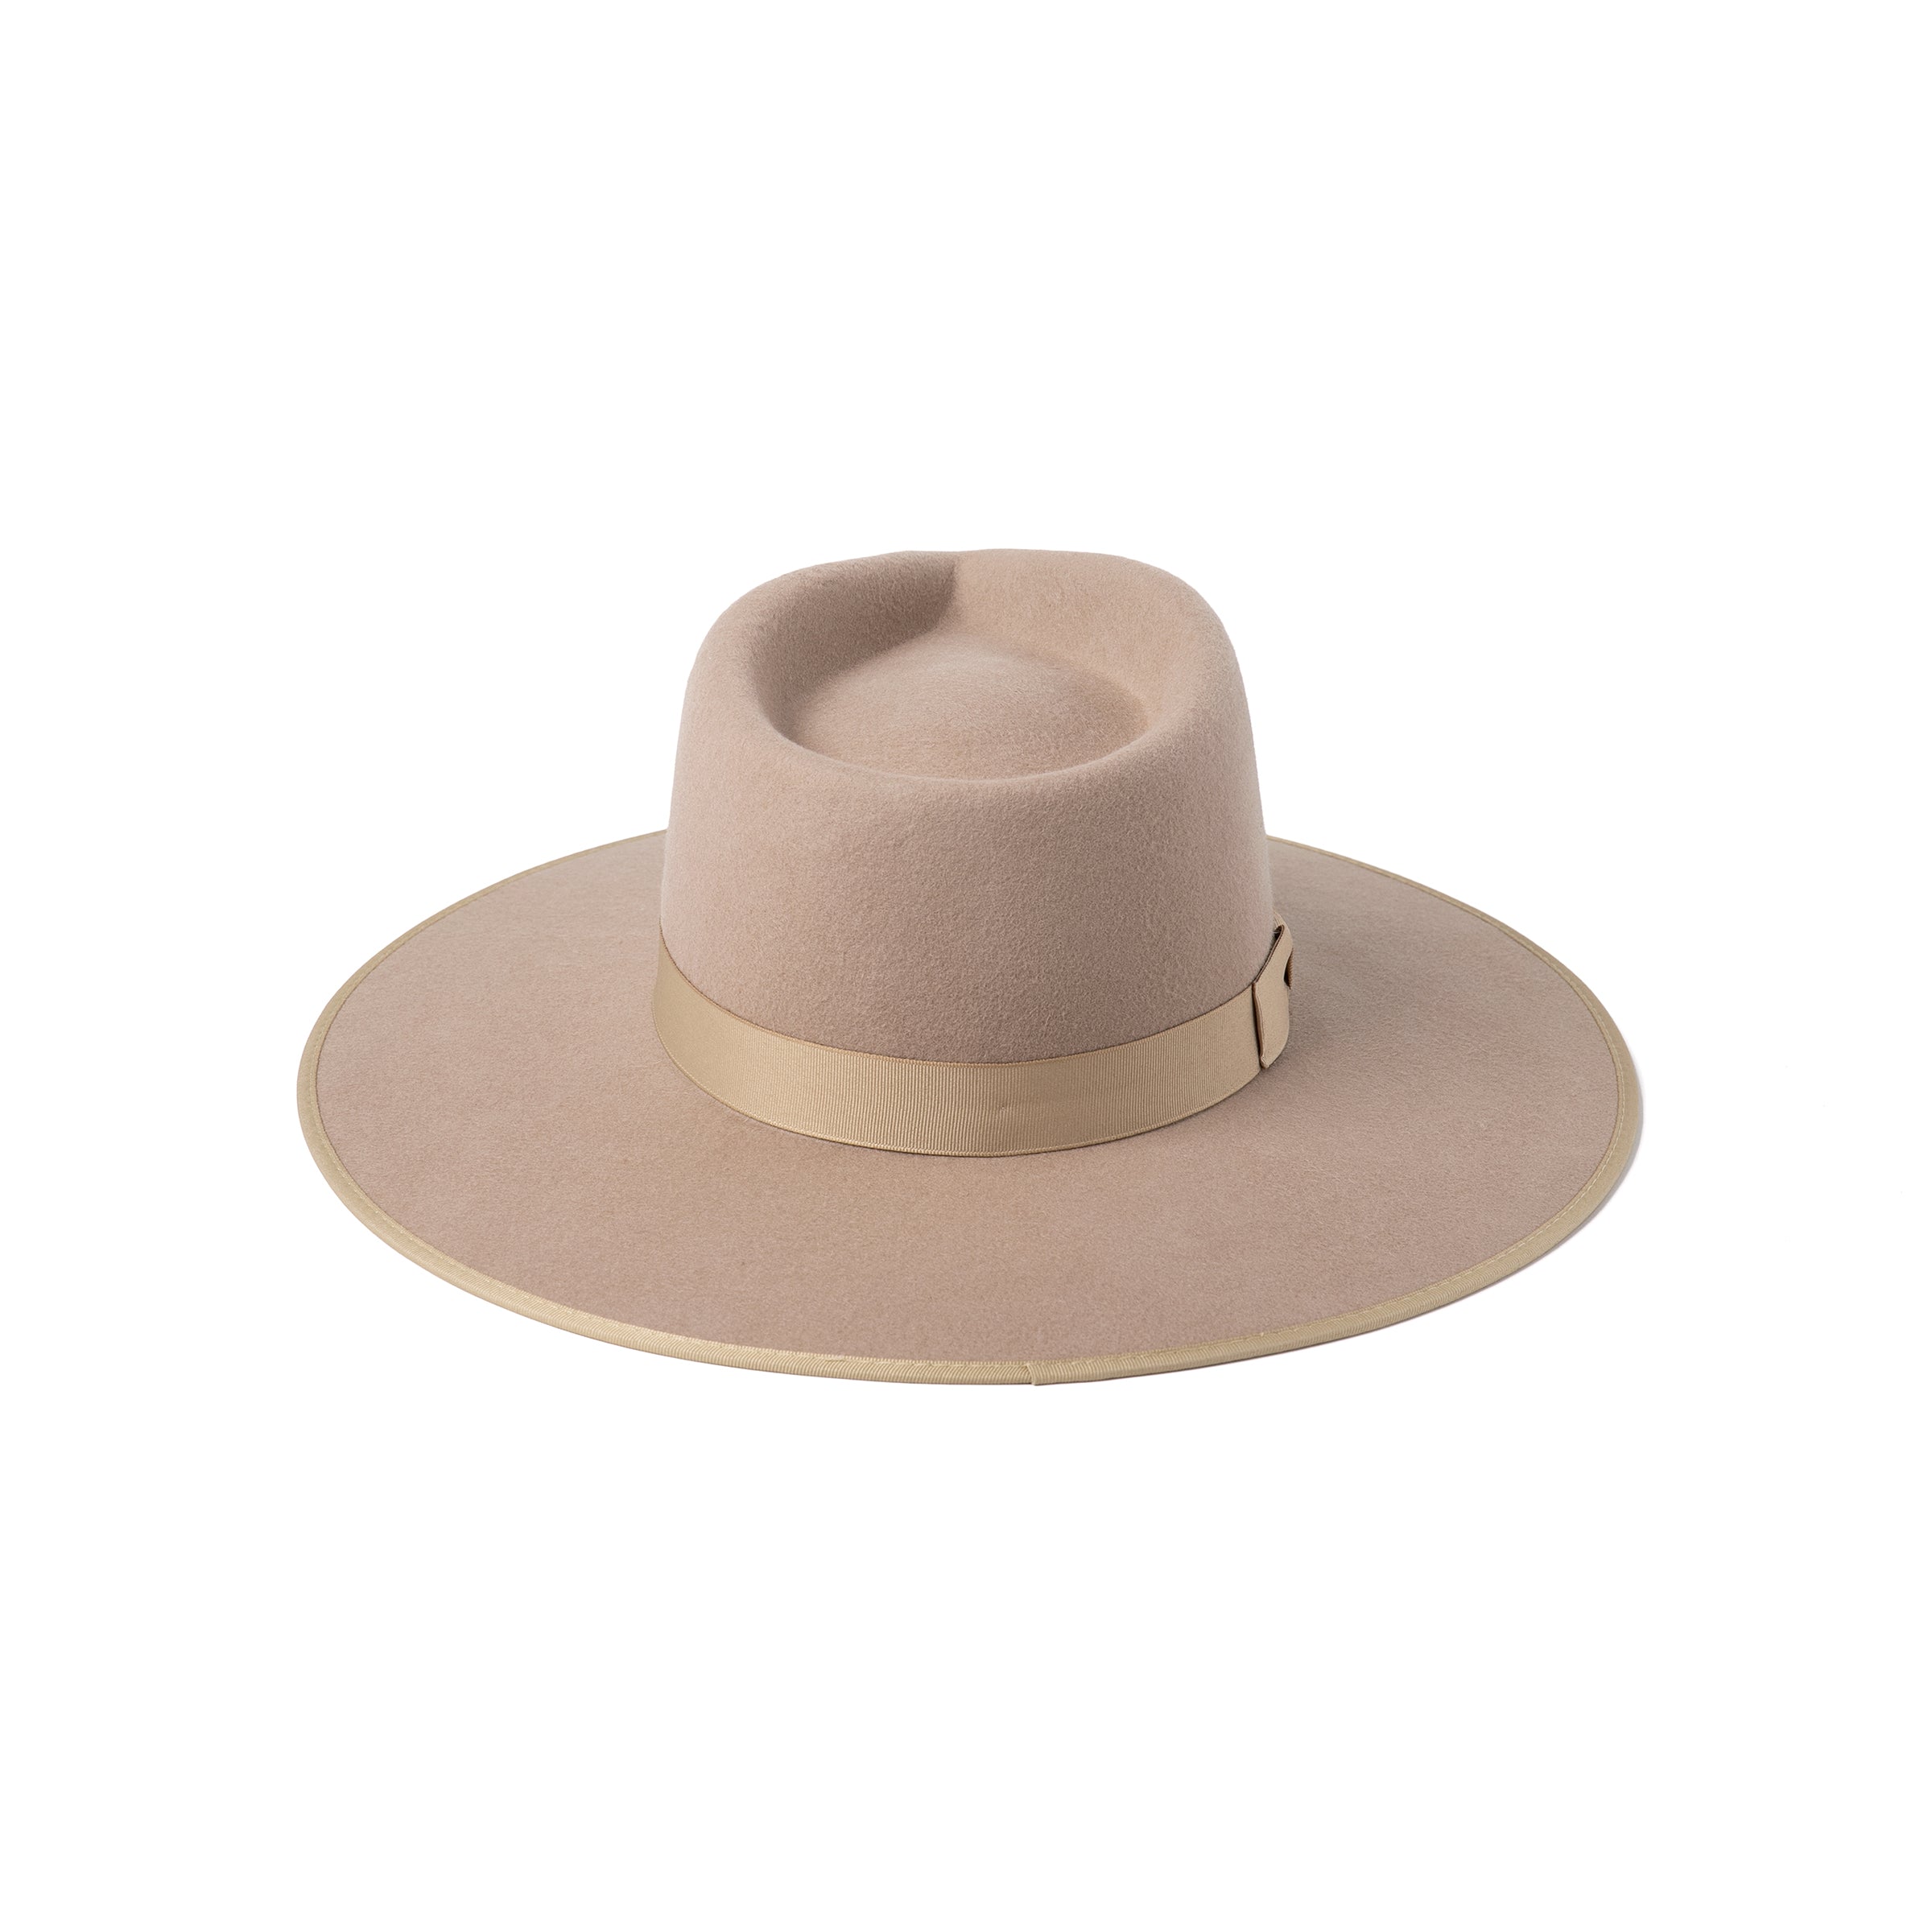 Zulu Rancher - Wool Felt Rancher Hat in White | Lack of Color US